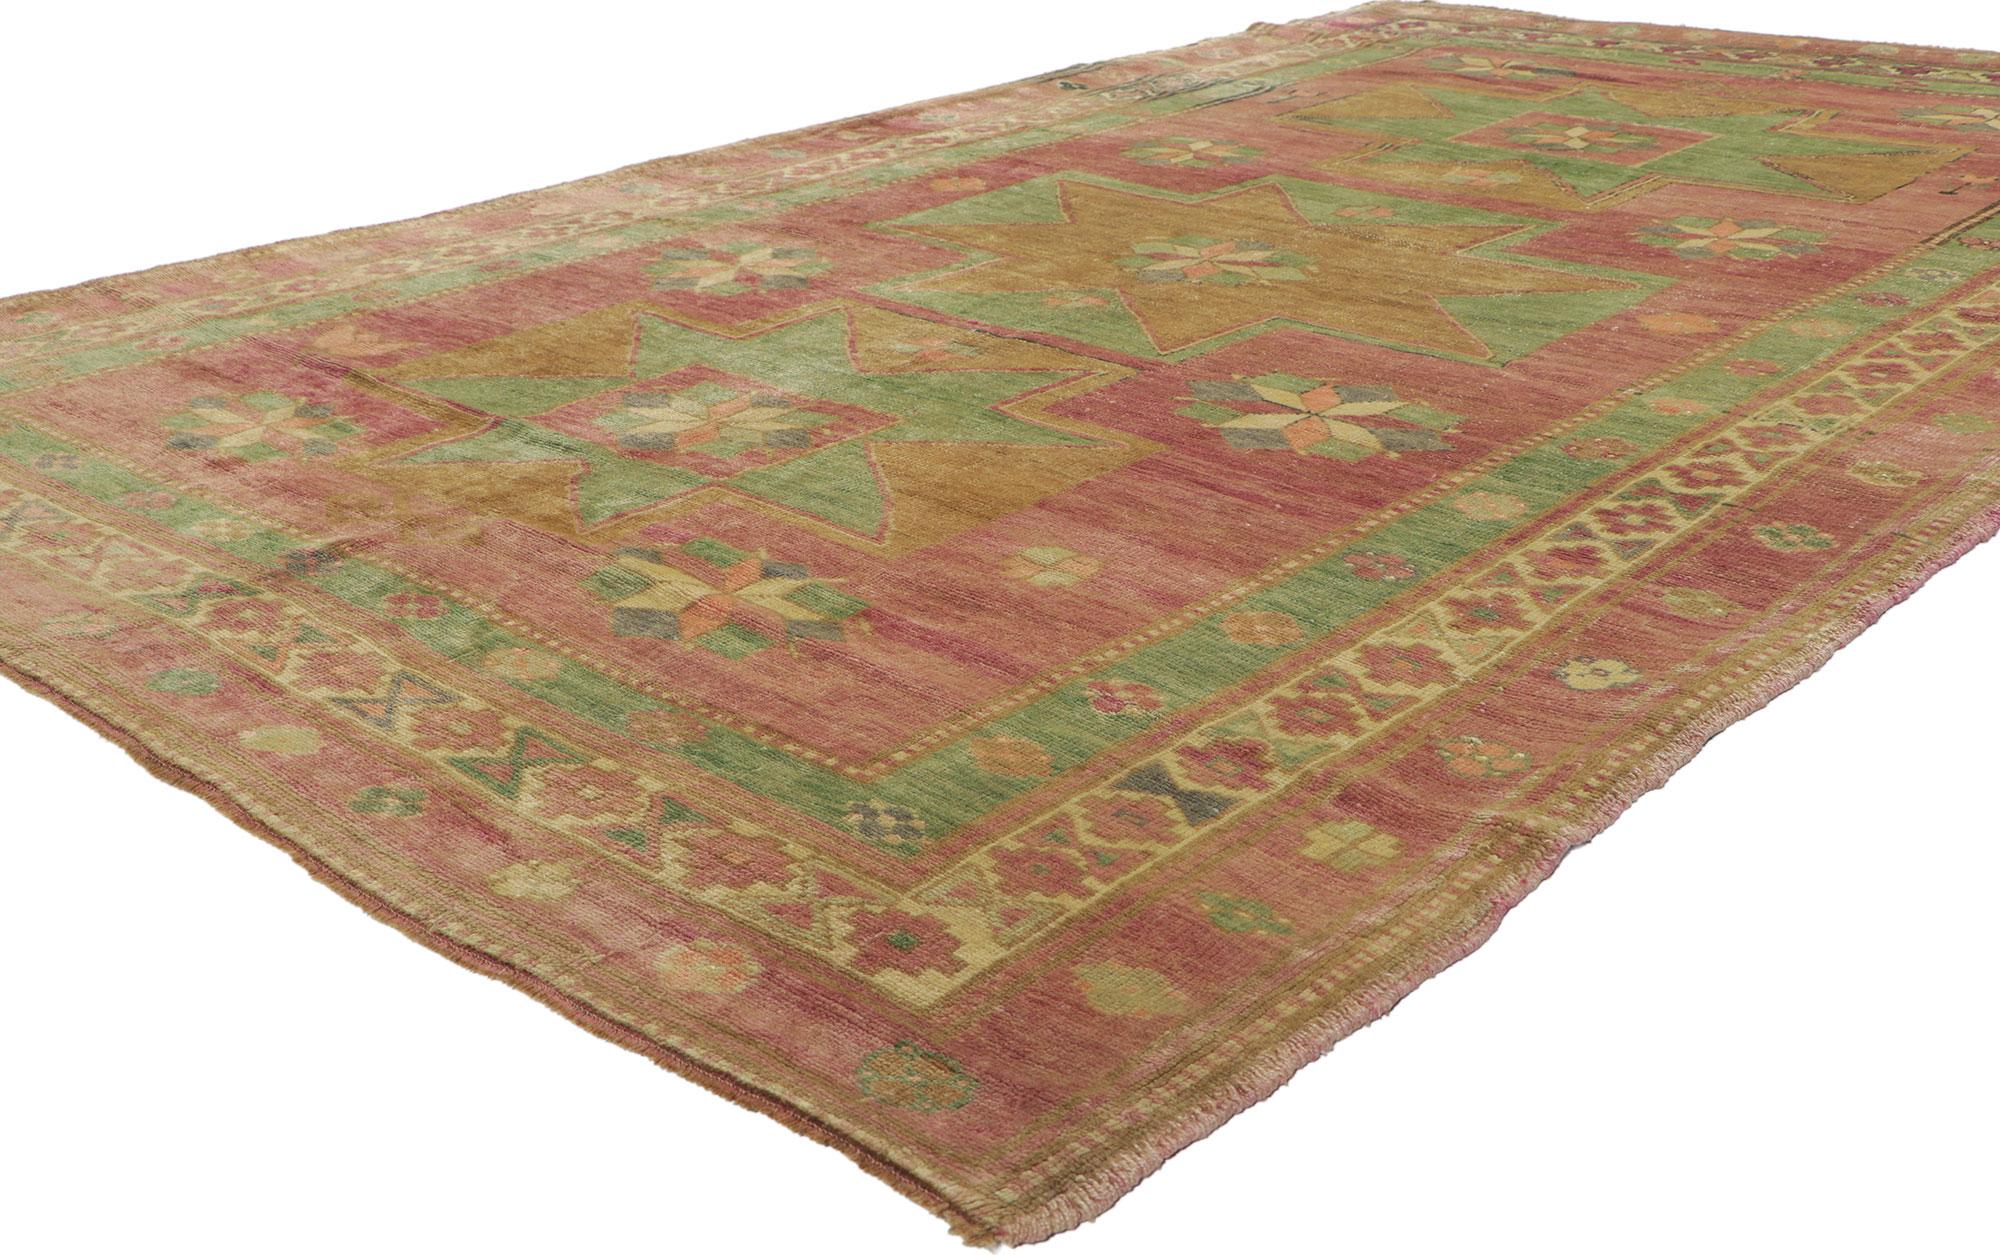 51385 Vintage Turkish Oushak Rug, 05'09 X 09'07. Antique-washed Turkish Oushak rugs are meticulously treated to achieve an antique or vintage look characterized by soft colors, replicating the natural fading and patina of aged rugs. Typically